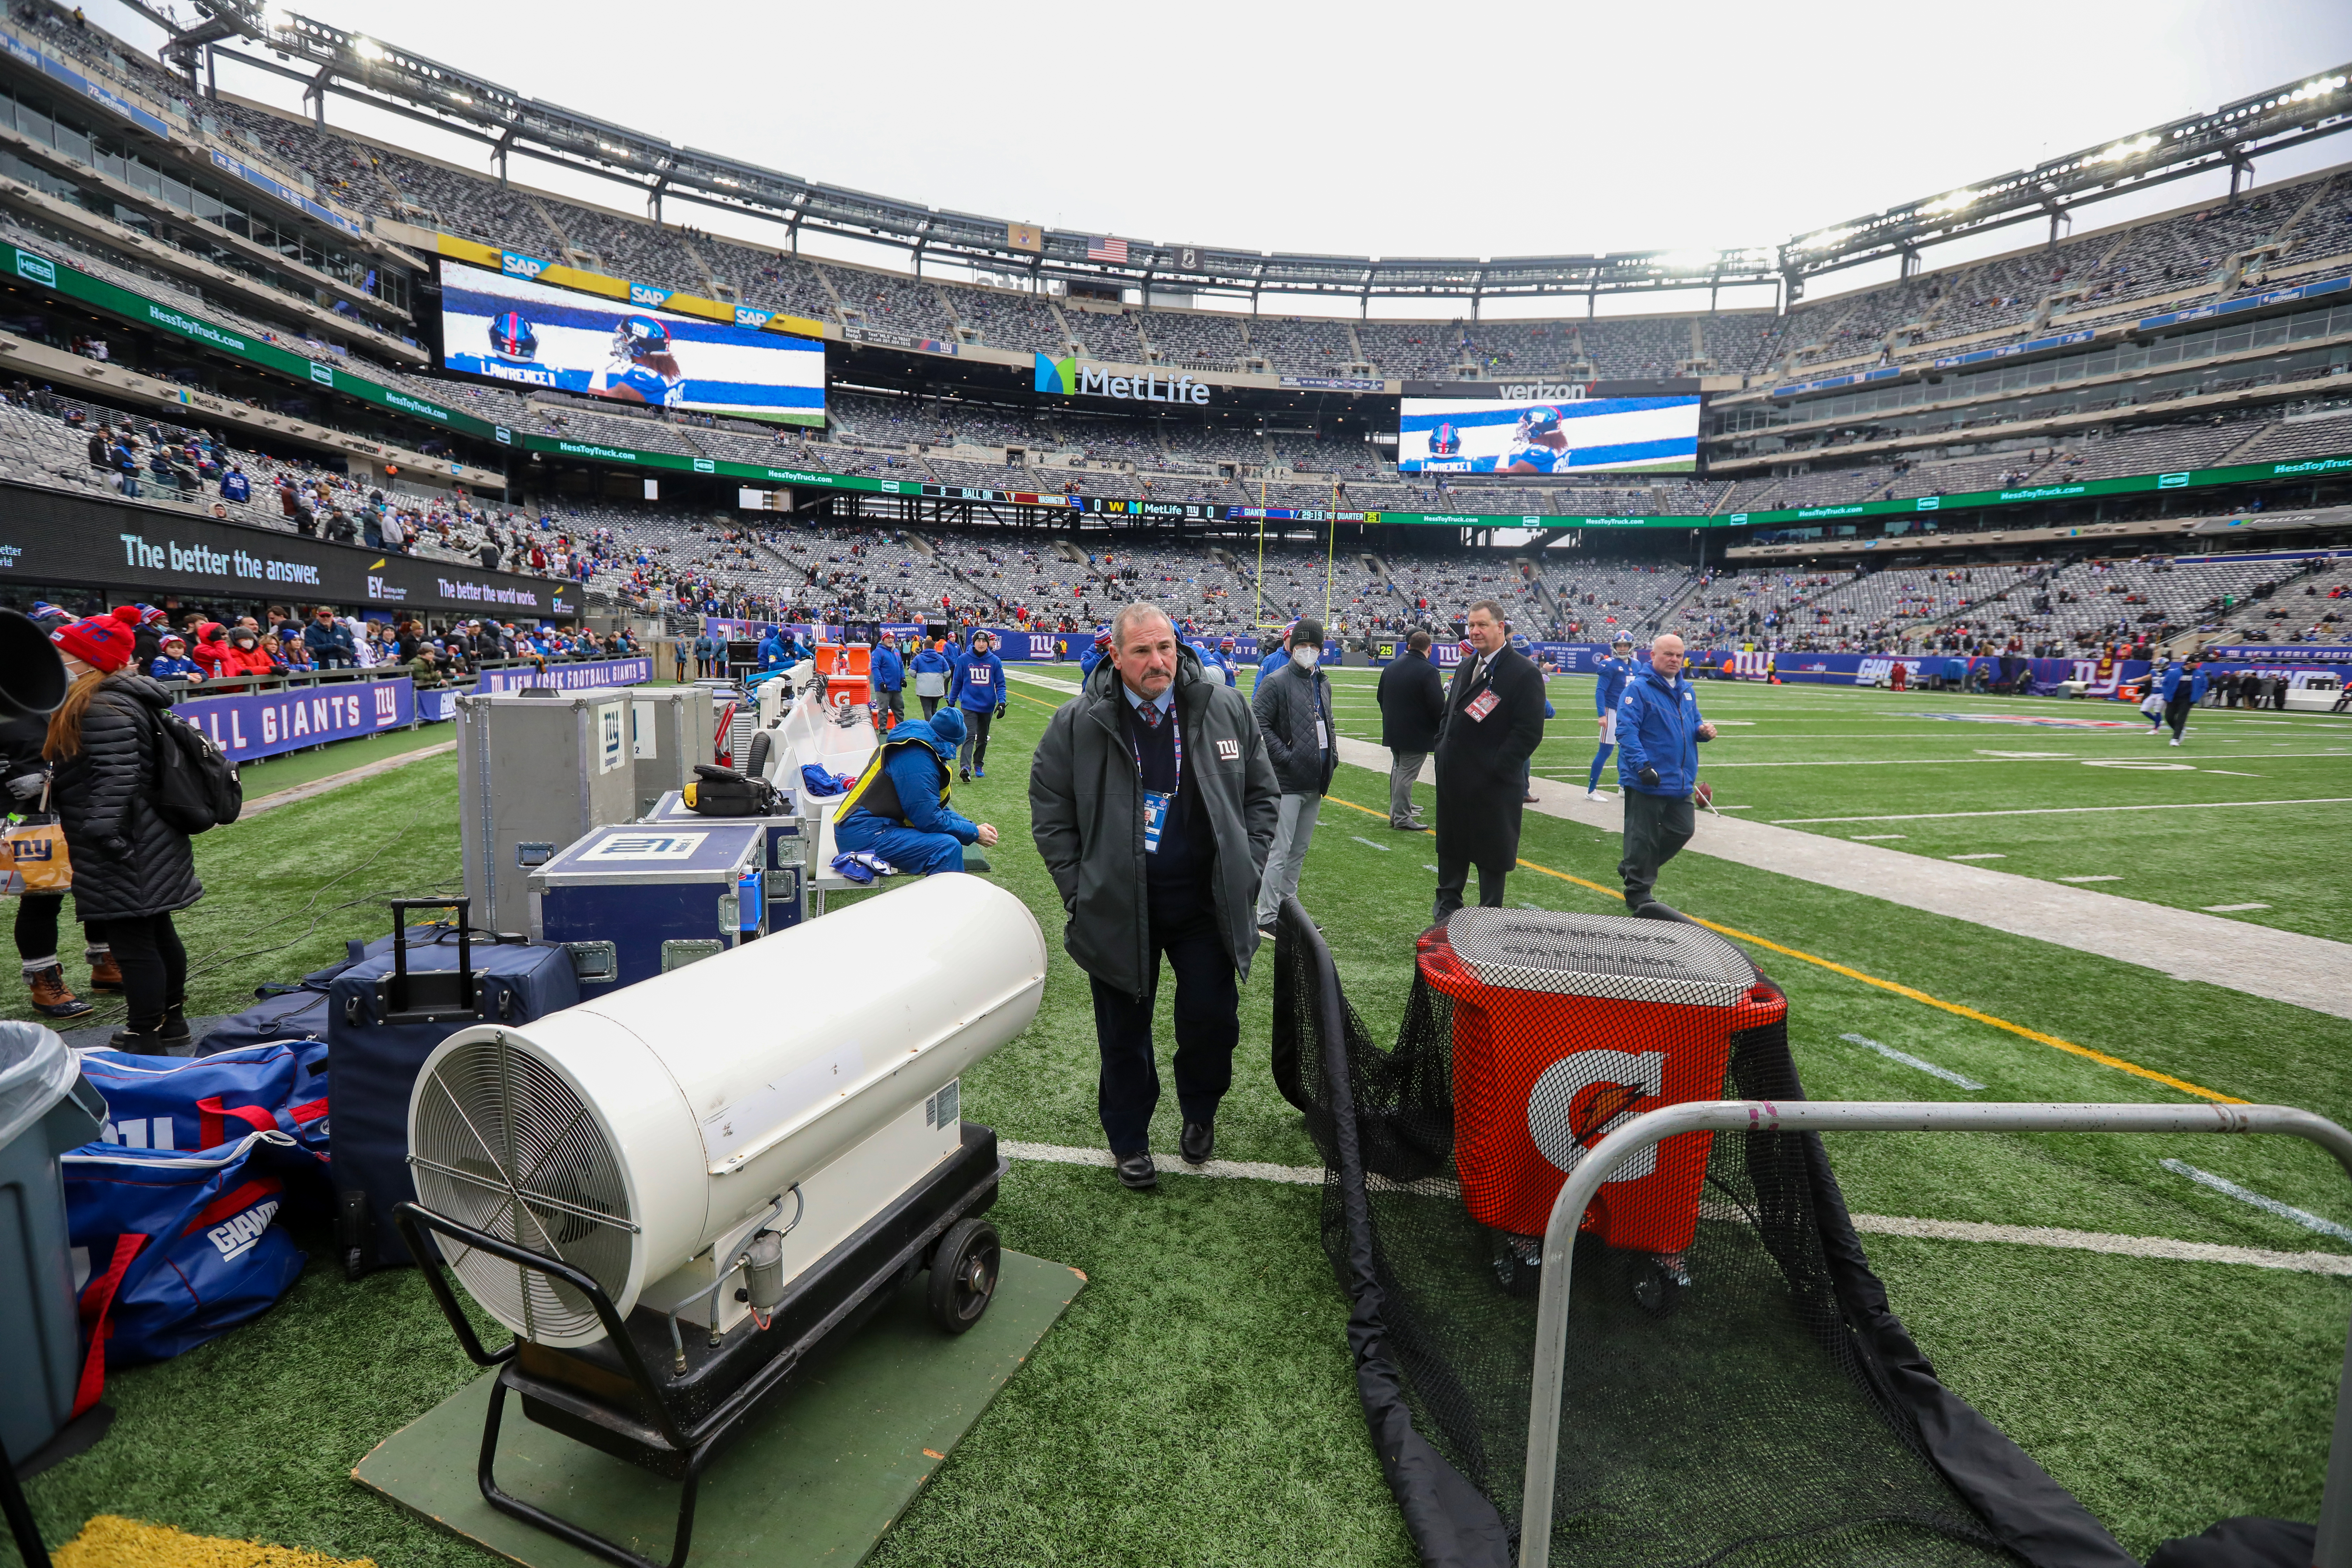 New York Giants general manager Dave Gettleman leaves the field after pregame warmups as the Giants prepare to host the Washington Football Team on Sunday, Jan. 9, 2022 in East Rutherford, N.J.